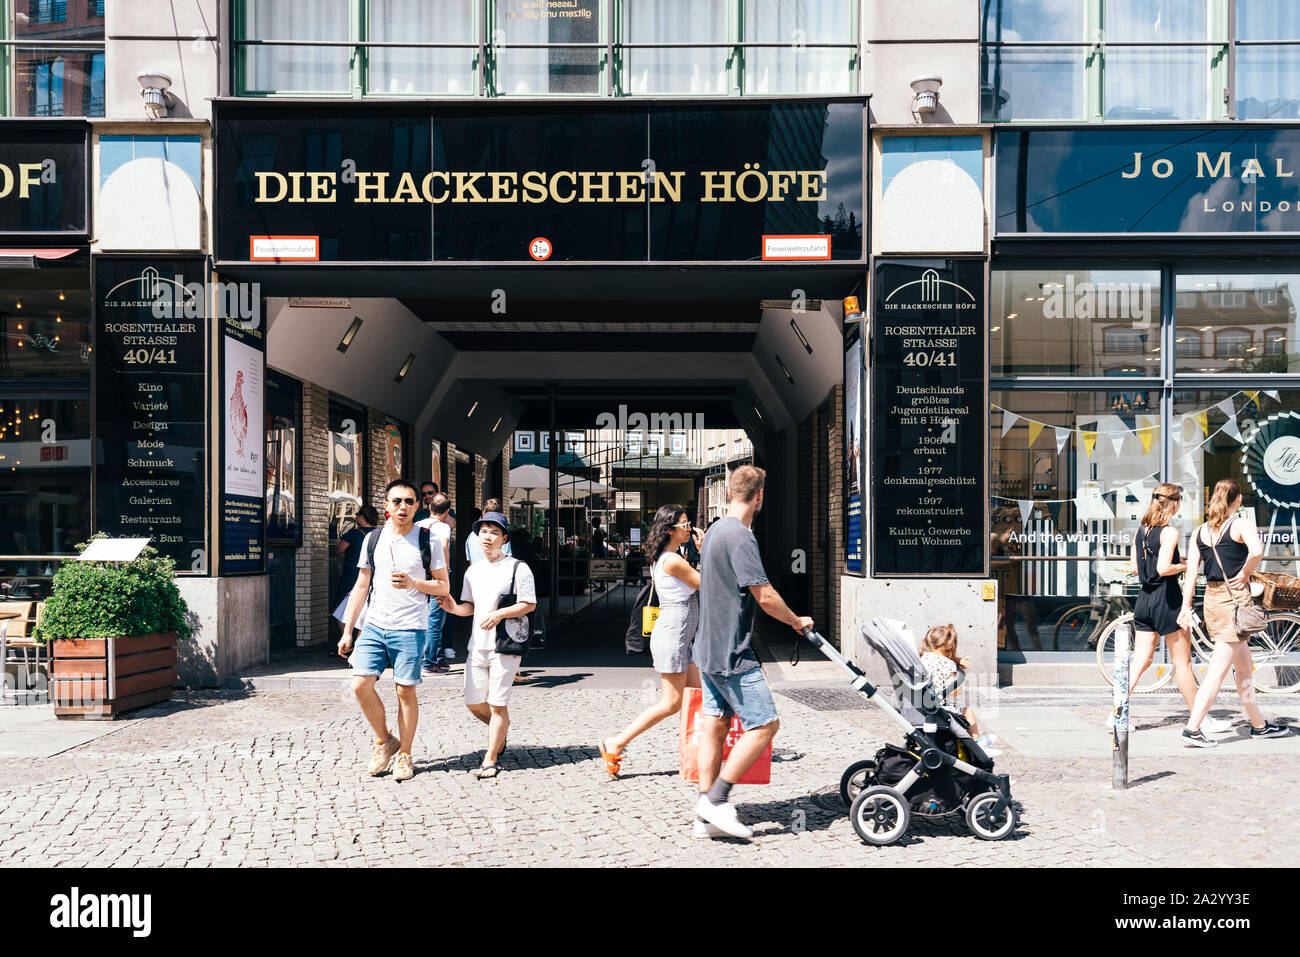 Hackeschen Hofe High Resolution Stock Photography and Images - Alamy